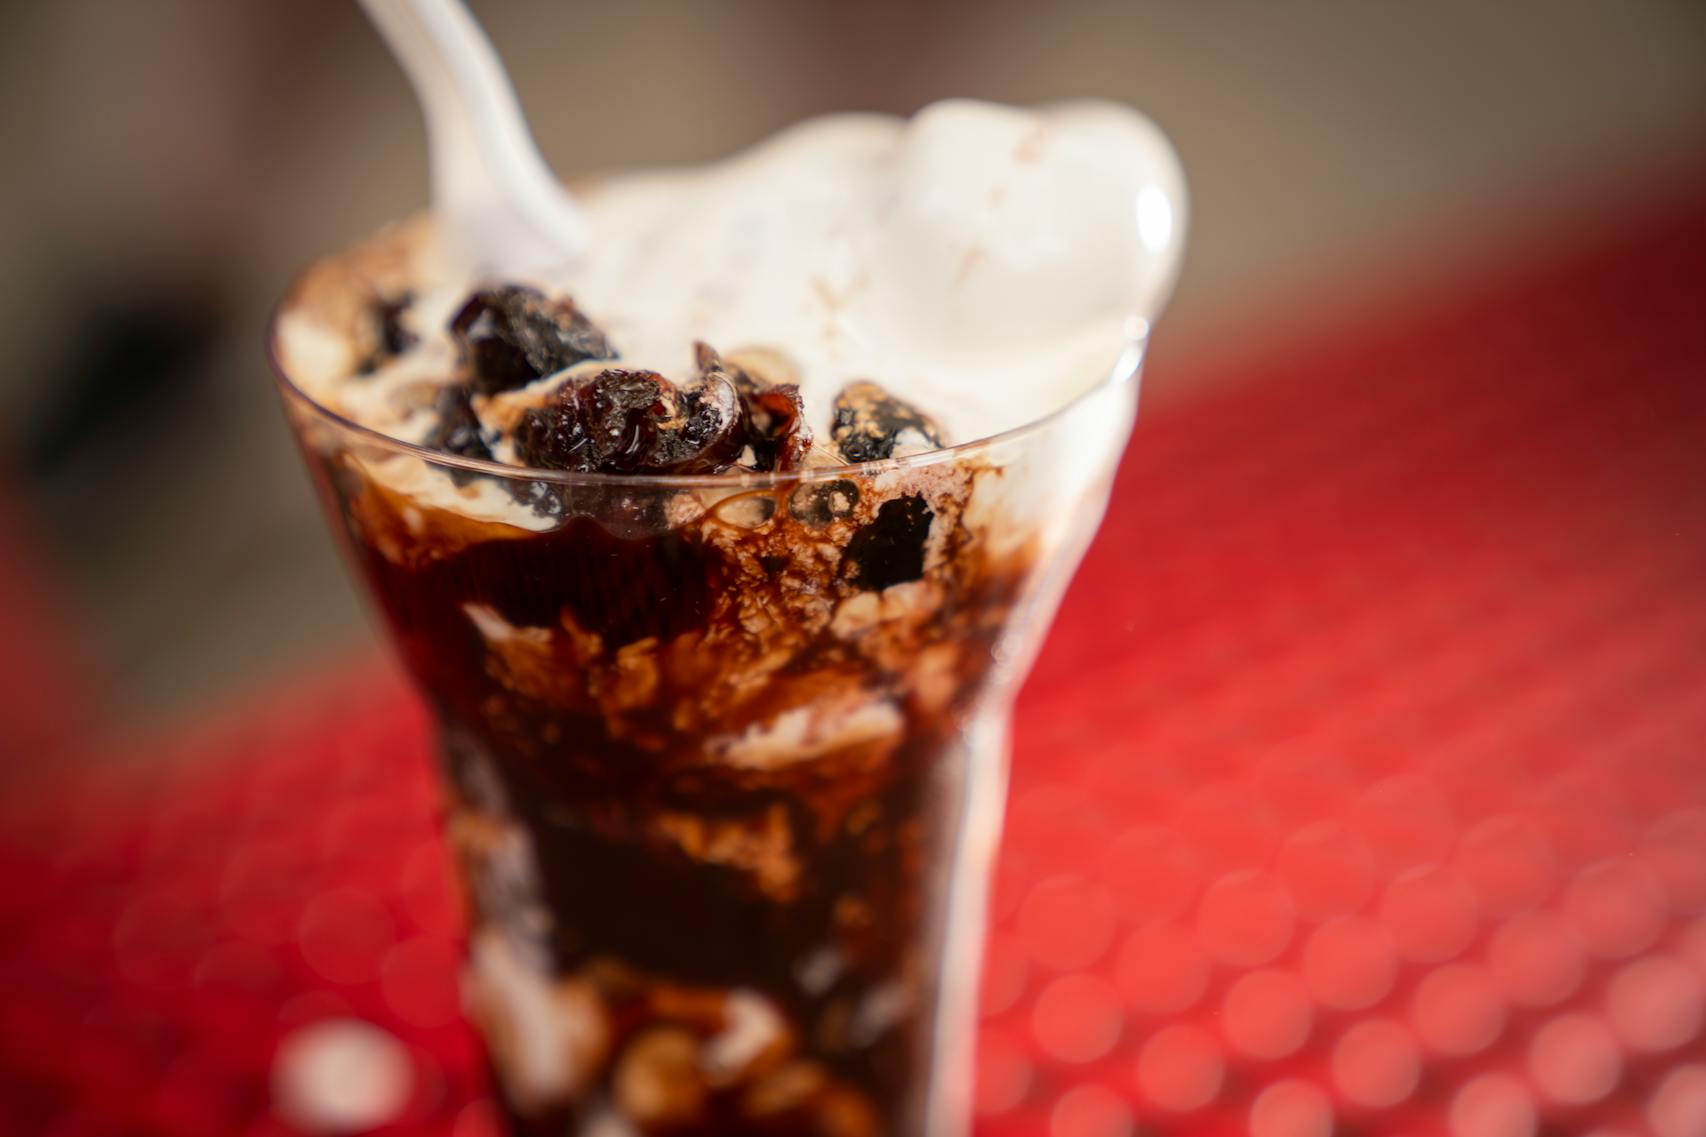 Cheers for Cherries Sundae from Dairy Goodness The new foods of the 2023 Minnesota State Fair photographed on the first day of the fair in Falcon Heights, Minn. on Tuesday, Aug. 8, 2023. ] LEILA NAVIDI • leila.navidi@startribune.com